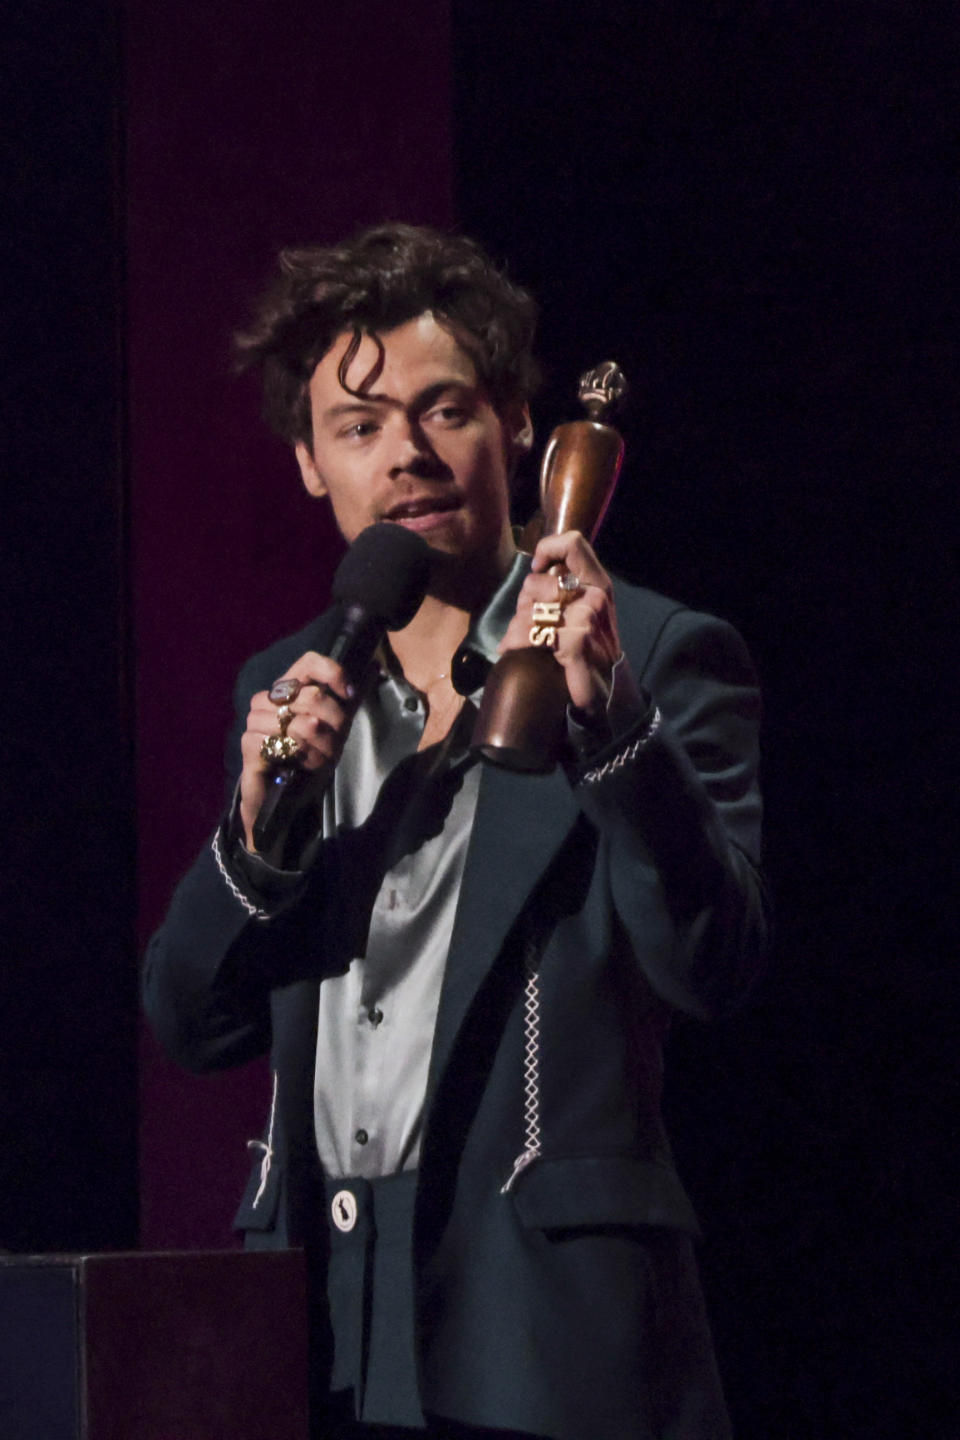 Harry Styles on stage accepting the award for Best Pop/R&B Act at the Brit Awards 2023 in London, Saturday, Feb. 11, 2023. (Photo by Vianney Le Caer/Invision/AP)